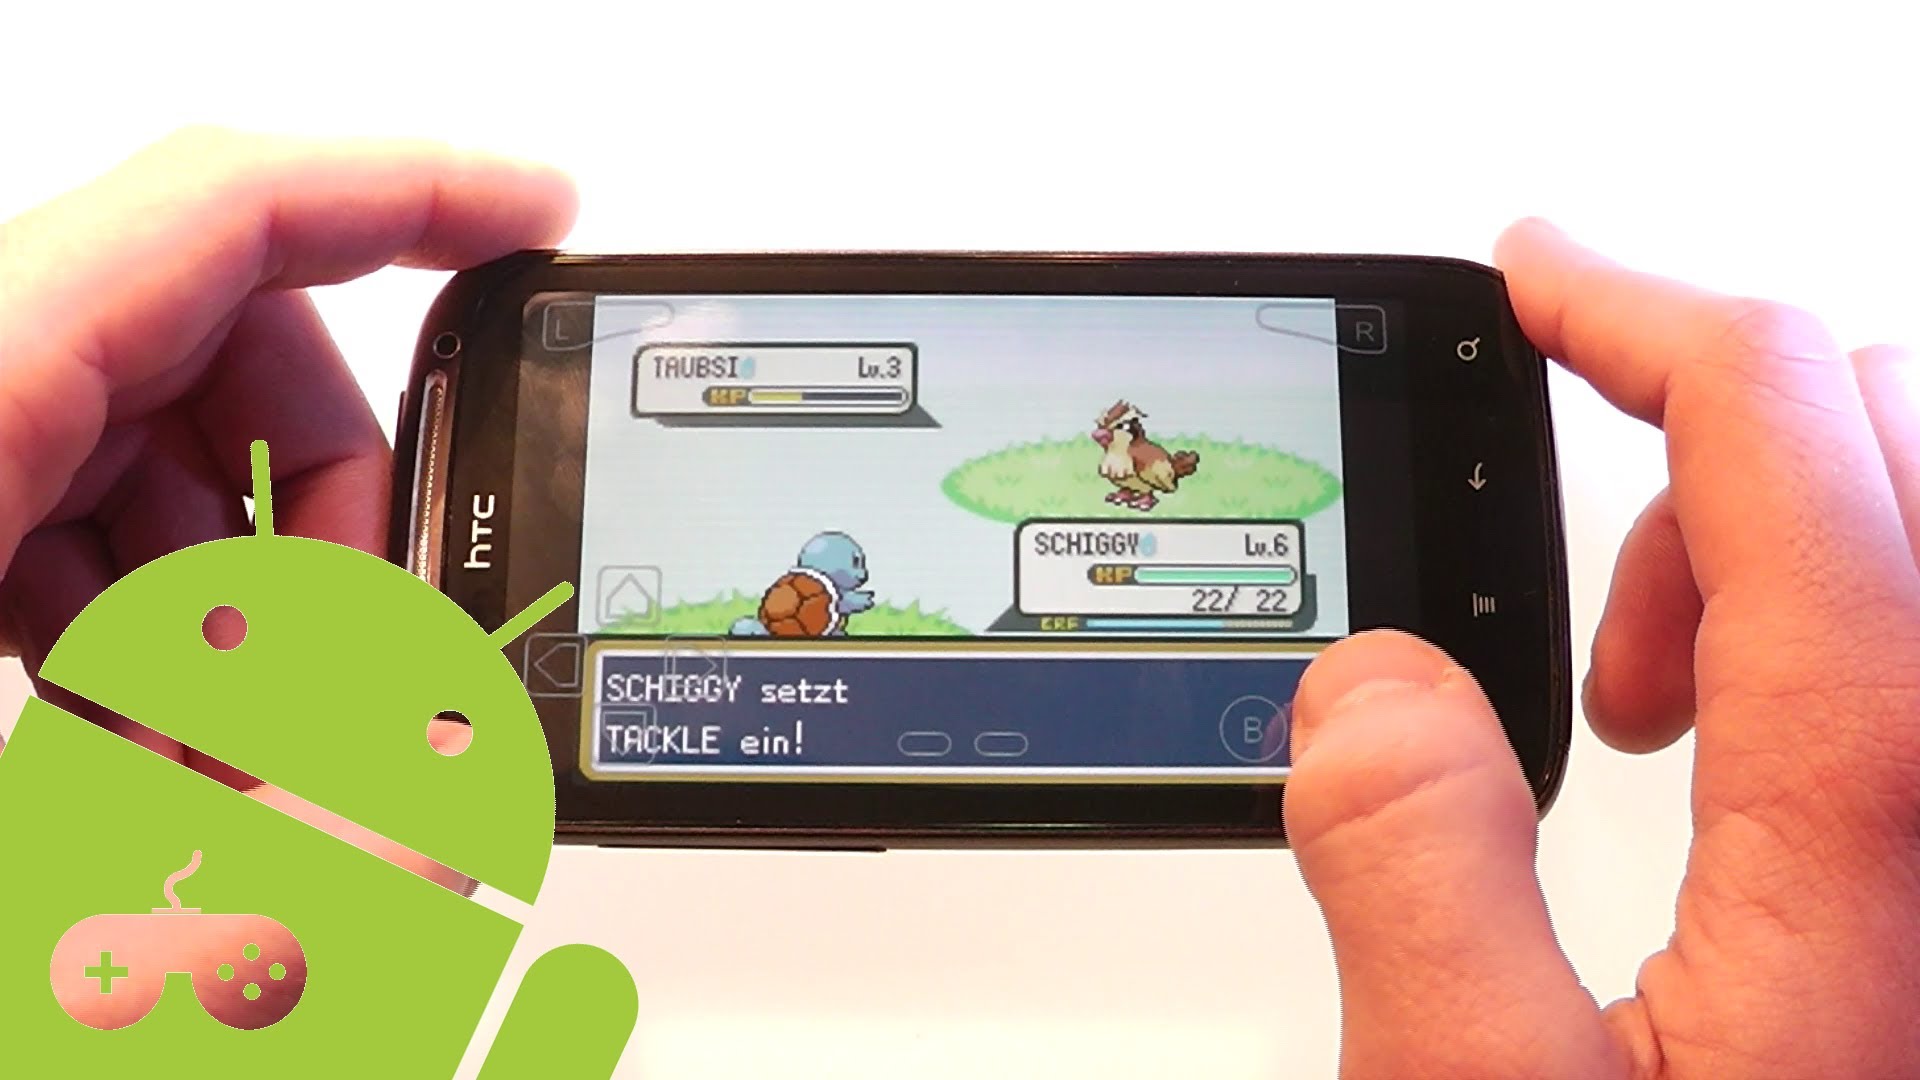 download gba emulator for android apk